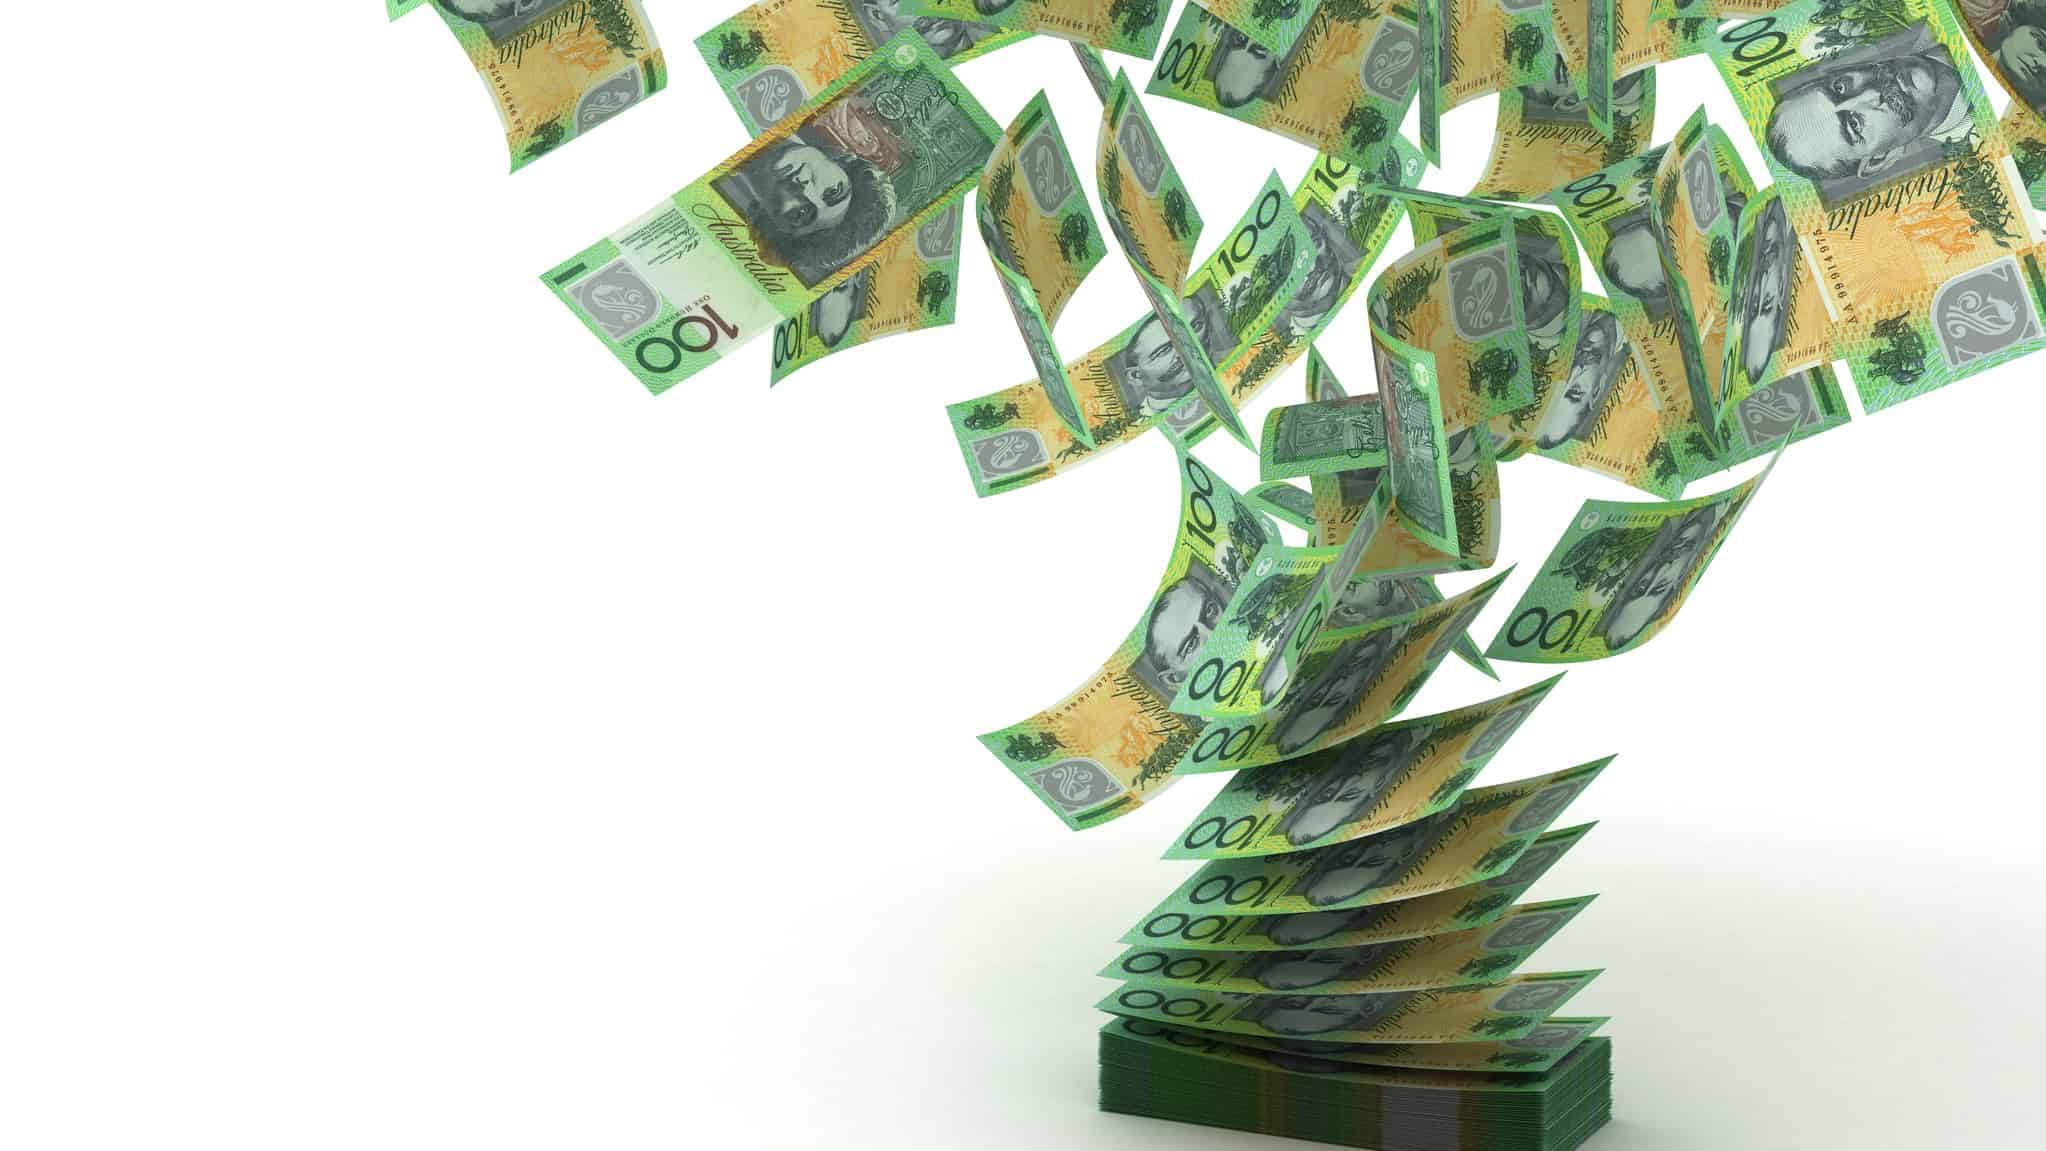 rise in asx share price represented by one hundred dollar notes flying freely through the air